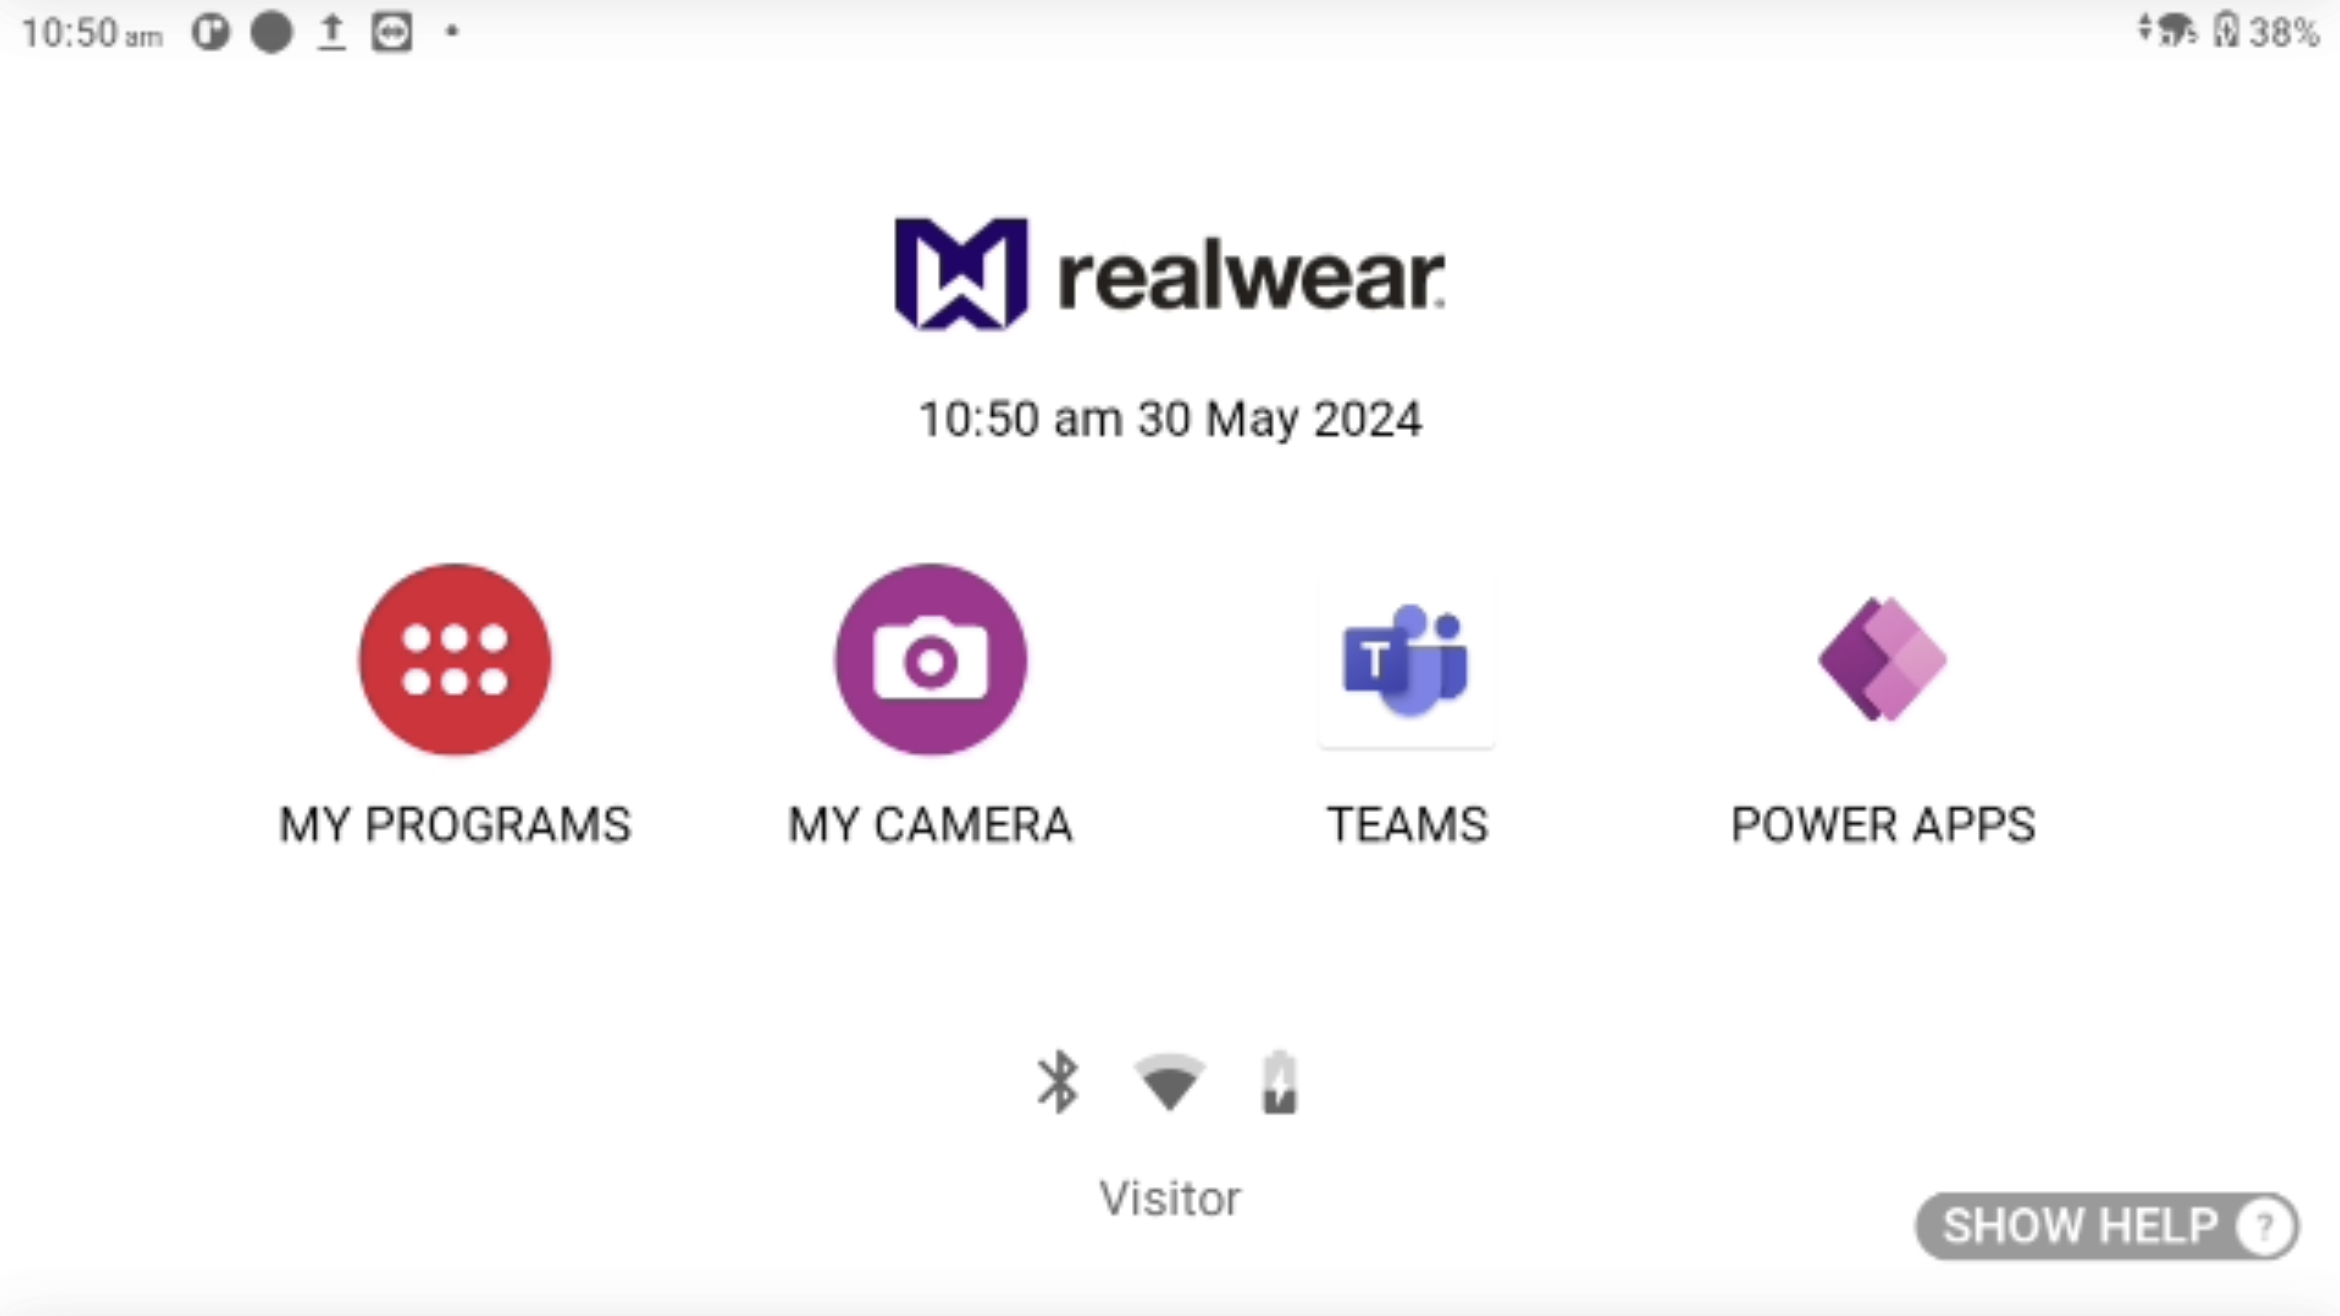 Through the looking glass: Power Apps and RealWear